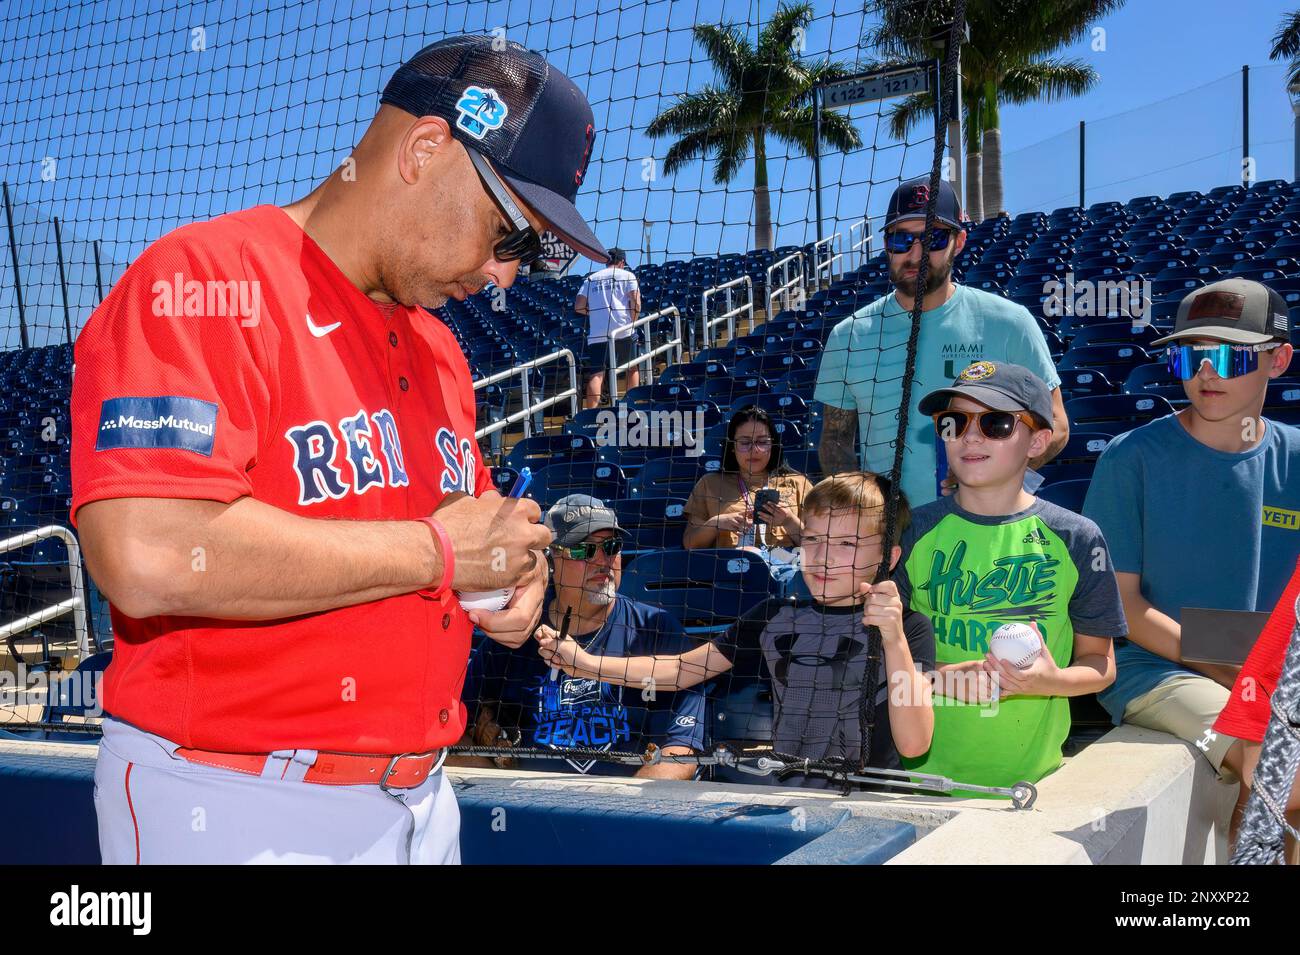 WEST PALM BEACH, FL - MARCH 01: Boston Red Sox manager Alex Cora signs  autographs for fans before an MLB spring training game between the Boston Red  Sox and the Houston Astros